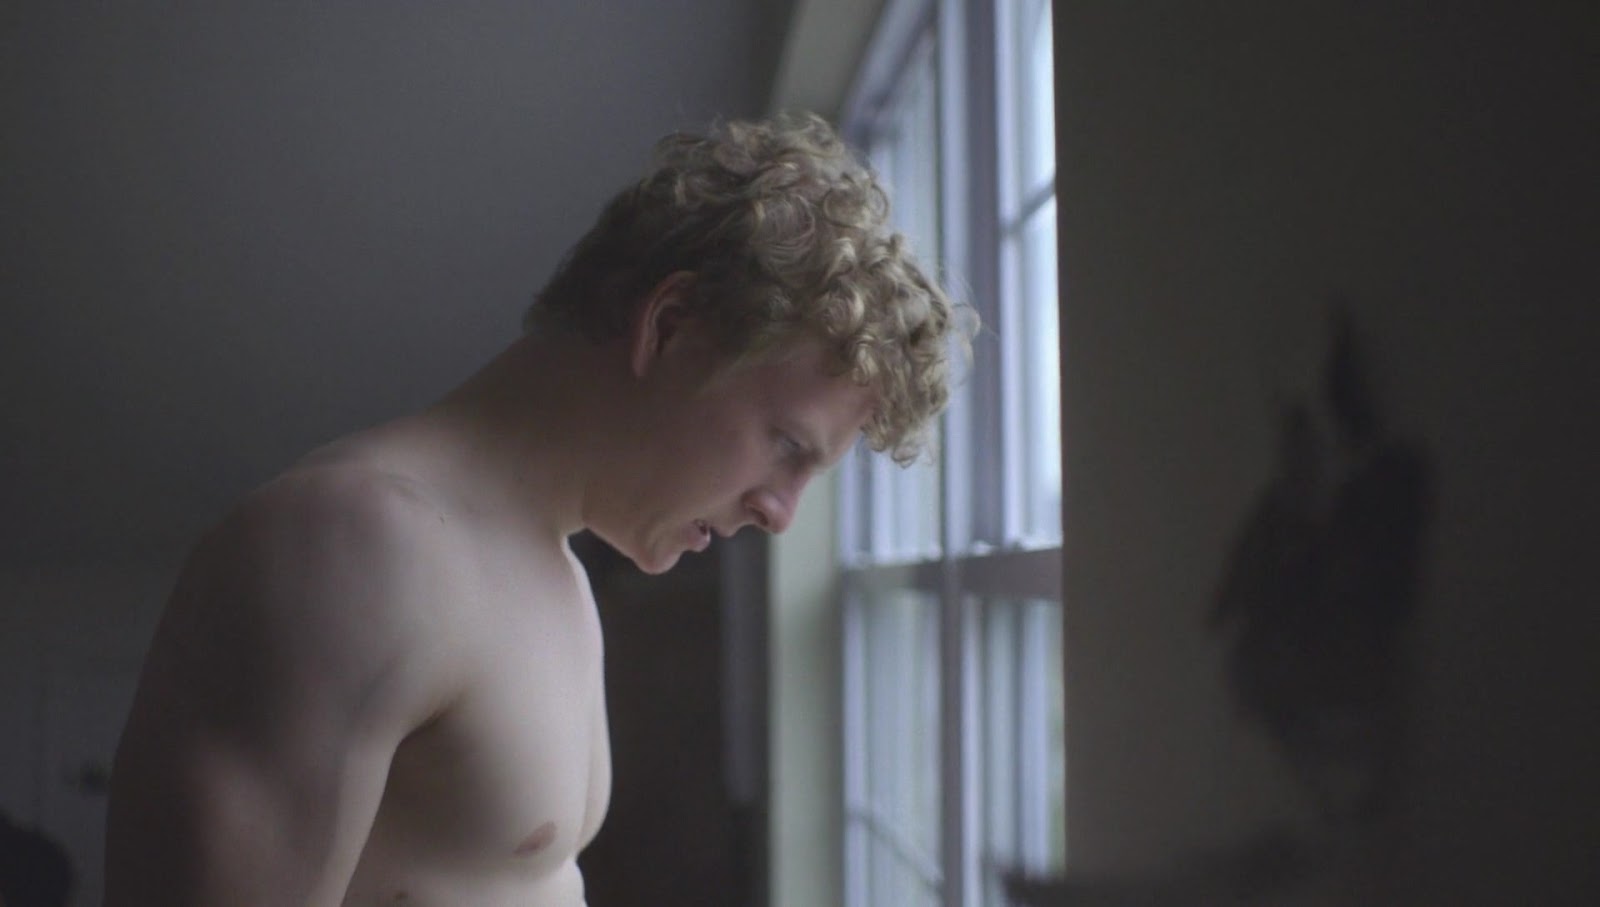 Patrick Gibson nude in The OA 1-01 "Homecoming". ausCAPS: Patrick ...